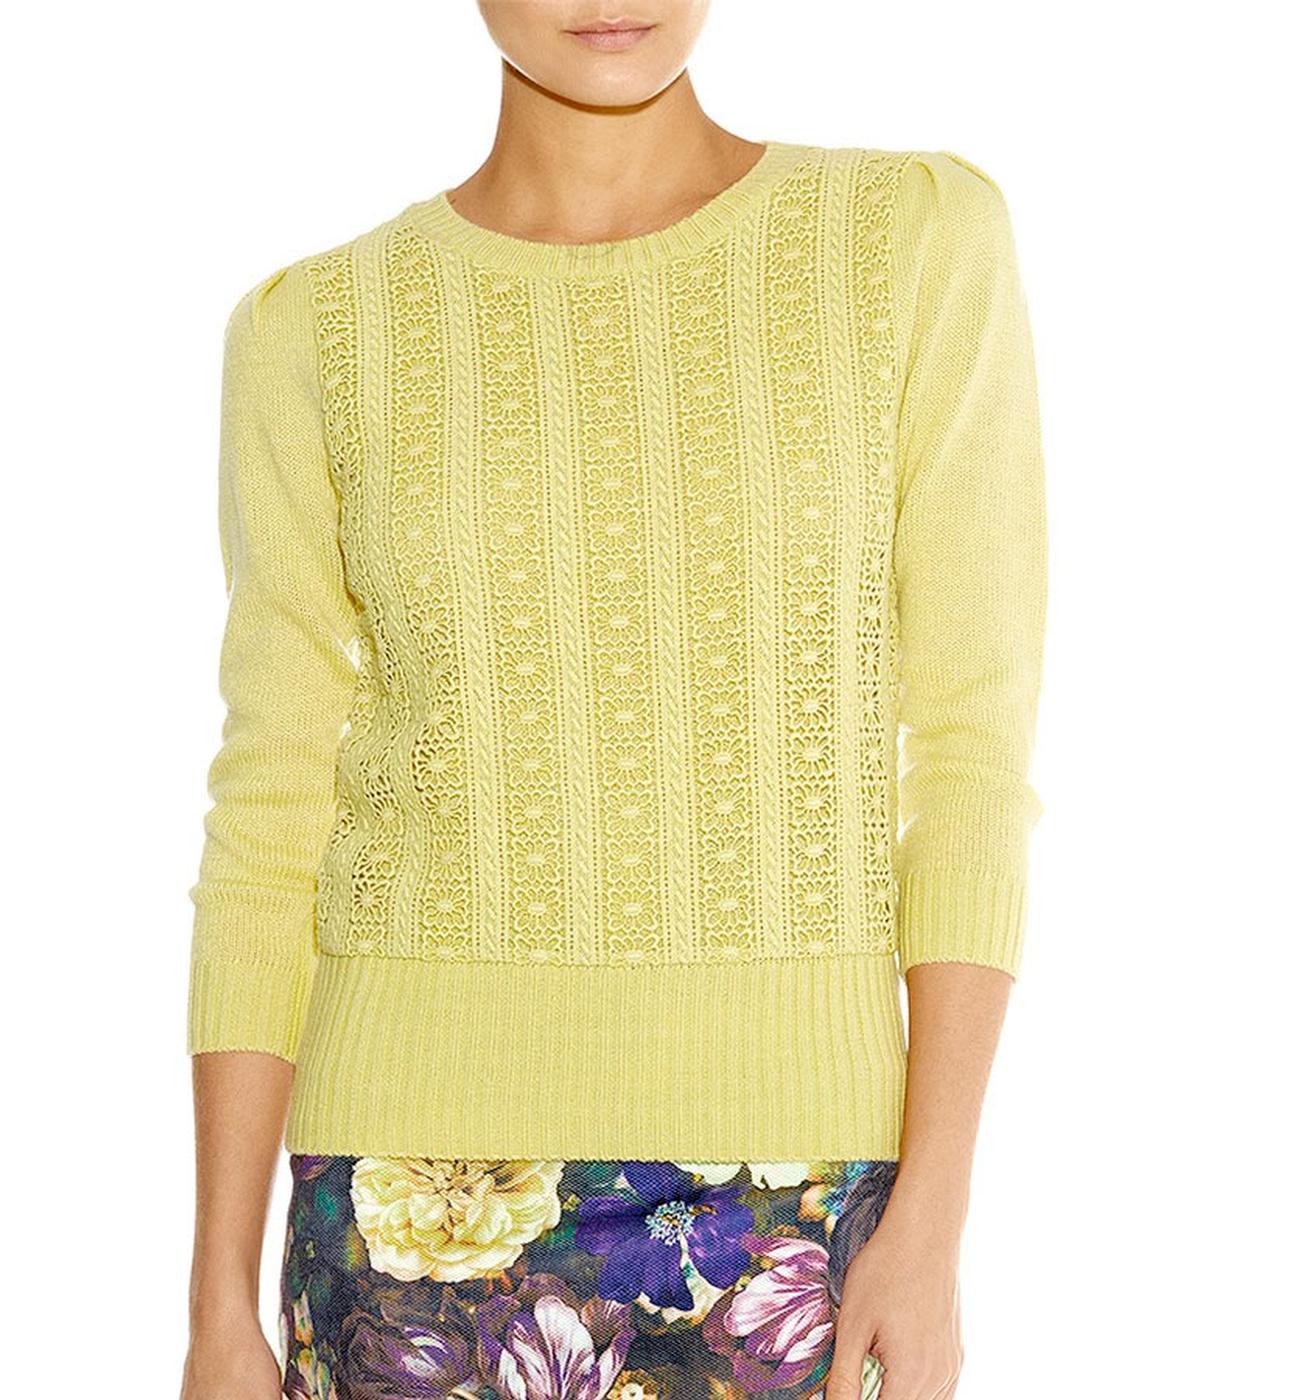 Darling Nicole Retro Vintage style Lace Front Jumper in Lime